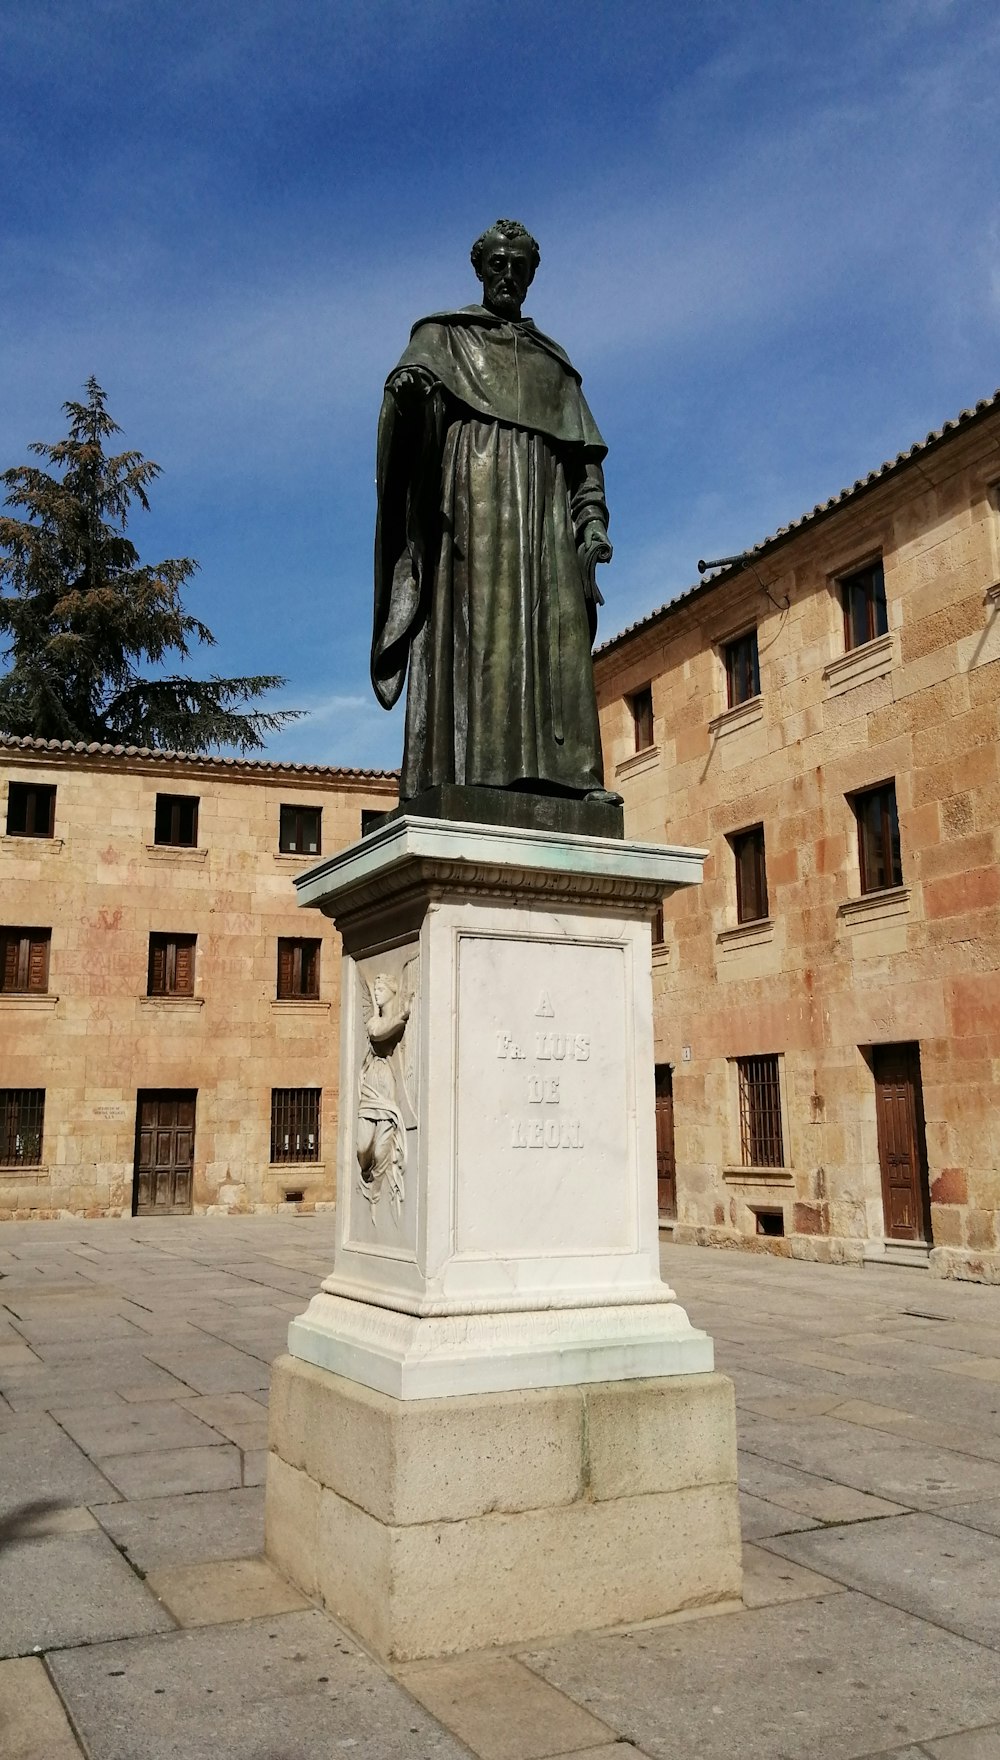 a statue of a man standing in a courtyard